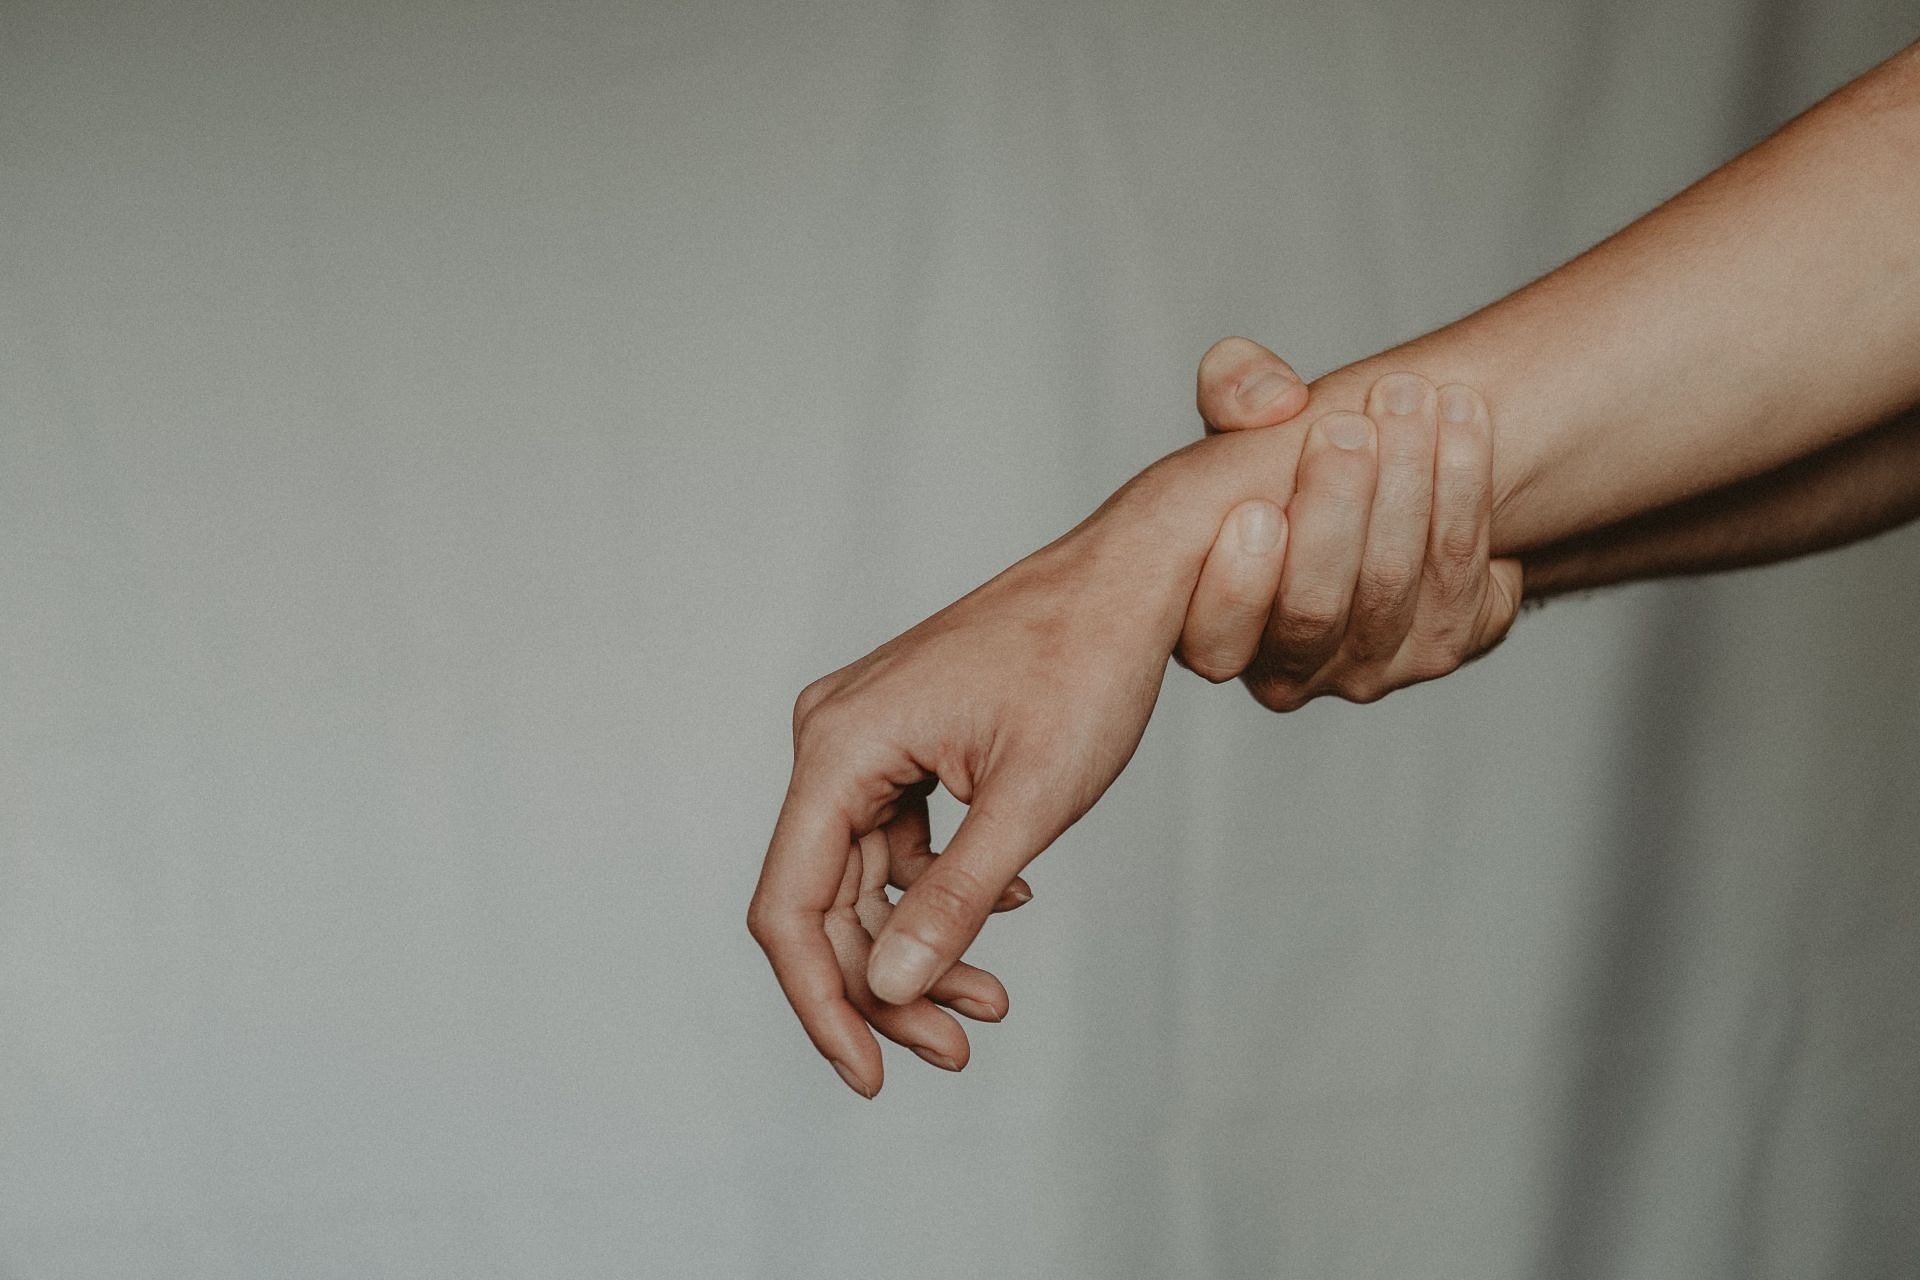 Hand cramping may be due to dehydration. (Image via Pexels/ Anete Lusina)